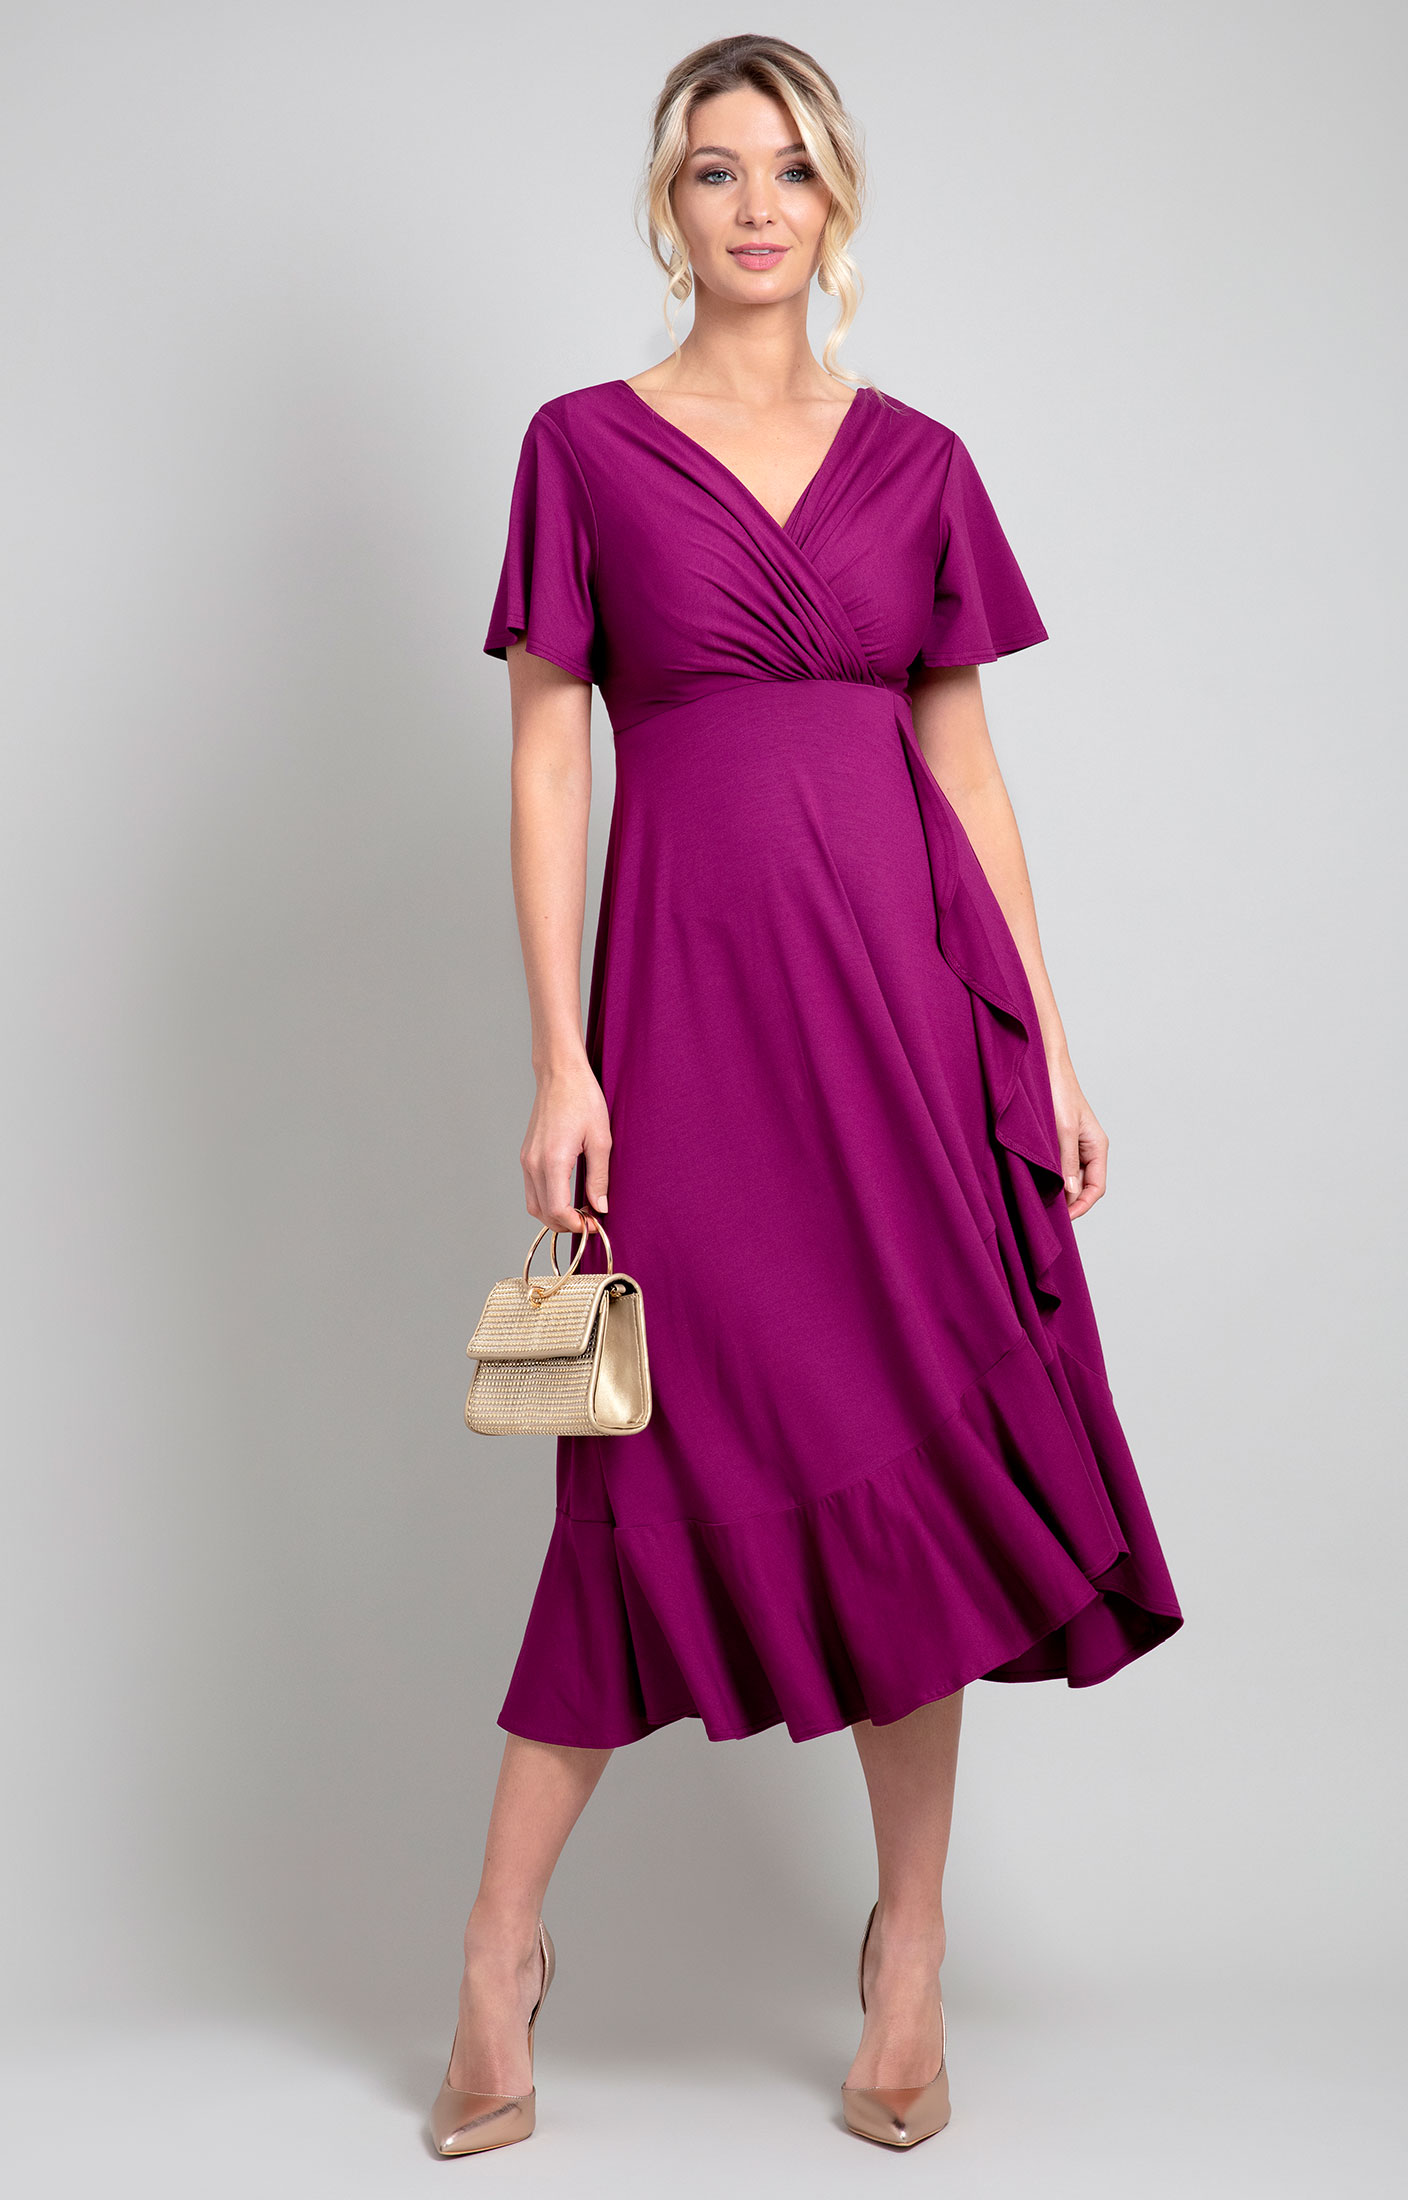 Waterfall Dress Boysenberry Pink - Evening Dresses, Occasion Wear and ...